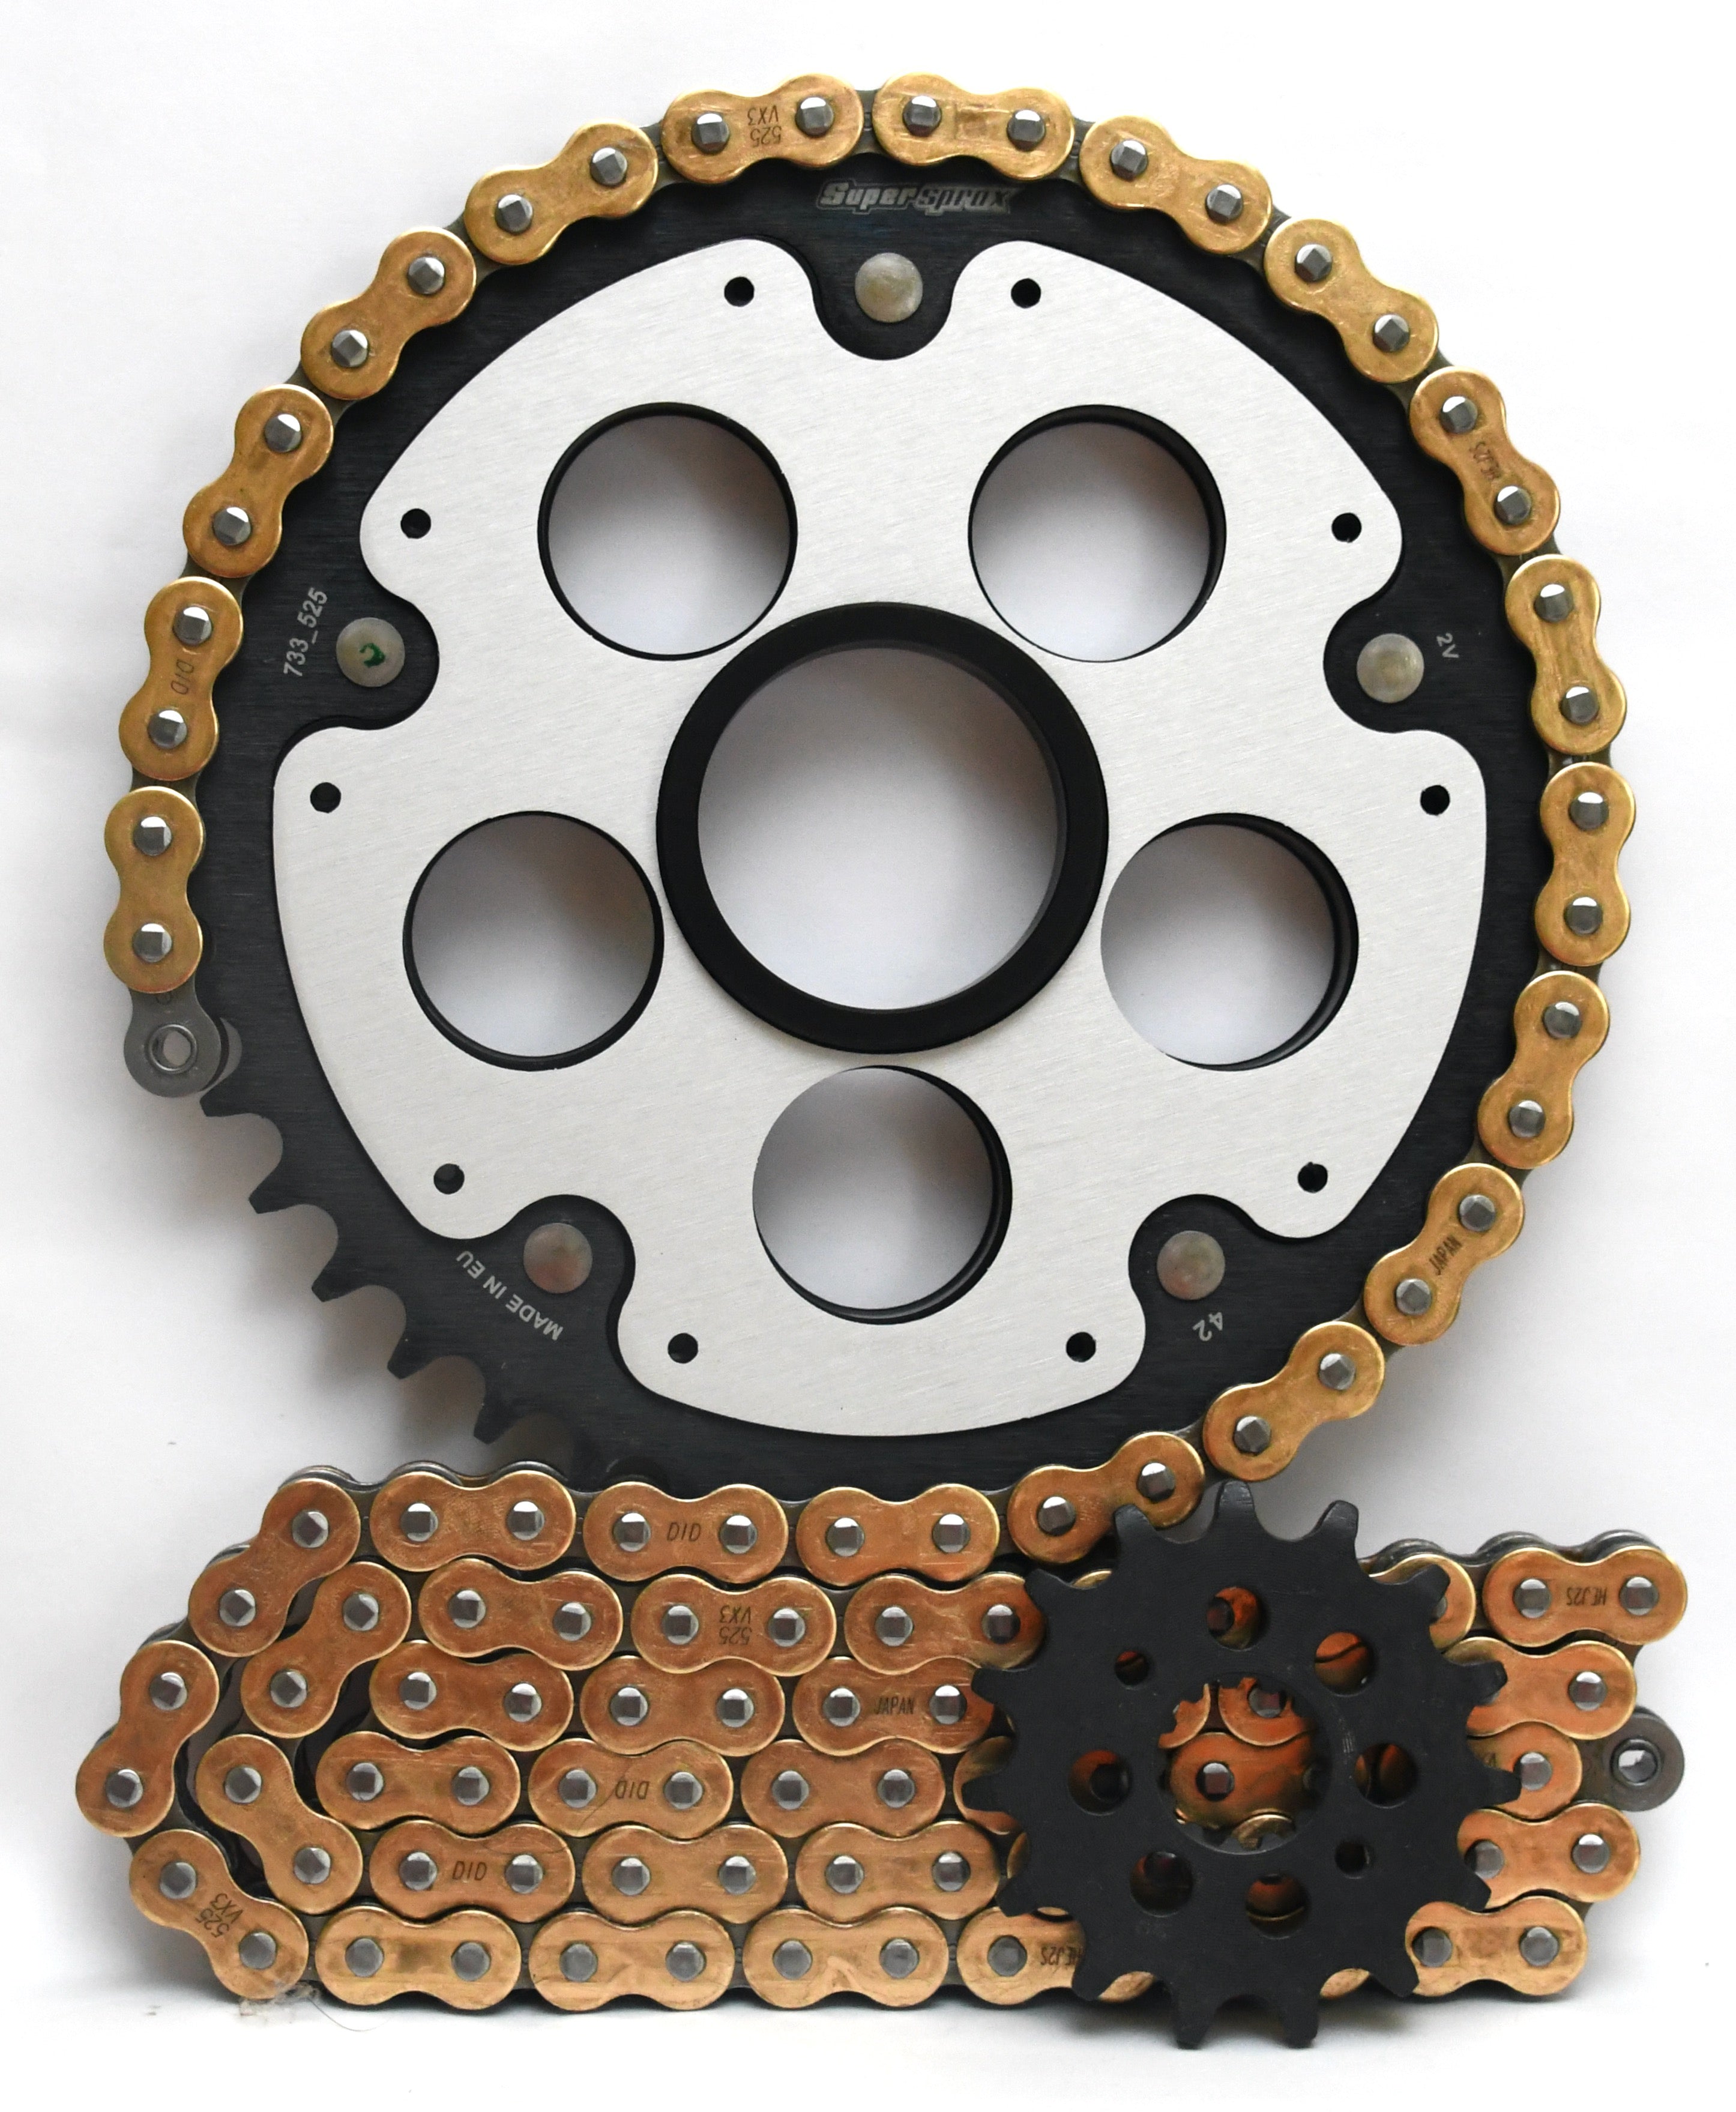 Supersprox Chain & Sprocket Kit for Ducati Hypermotard 821 (Inc SP) 2013-2015 - Standard Gearing